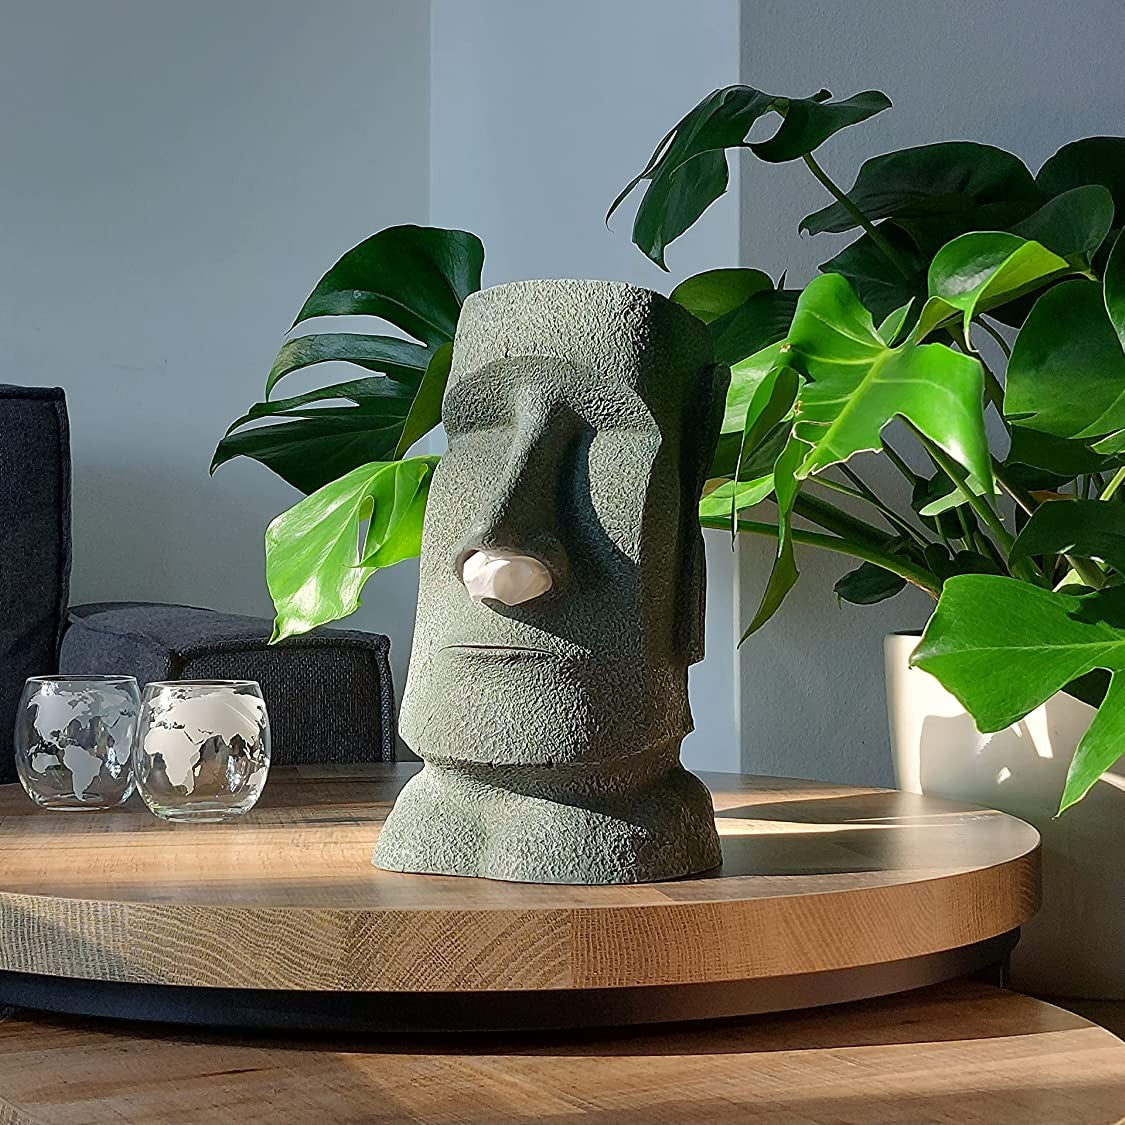 A moai shaped tissue box holder on a wooden table with a green plant behind it.